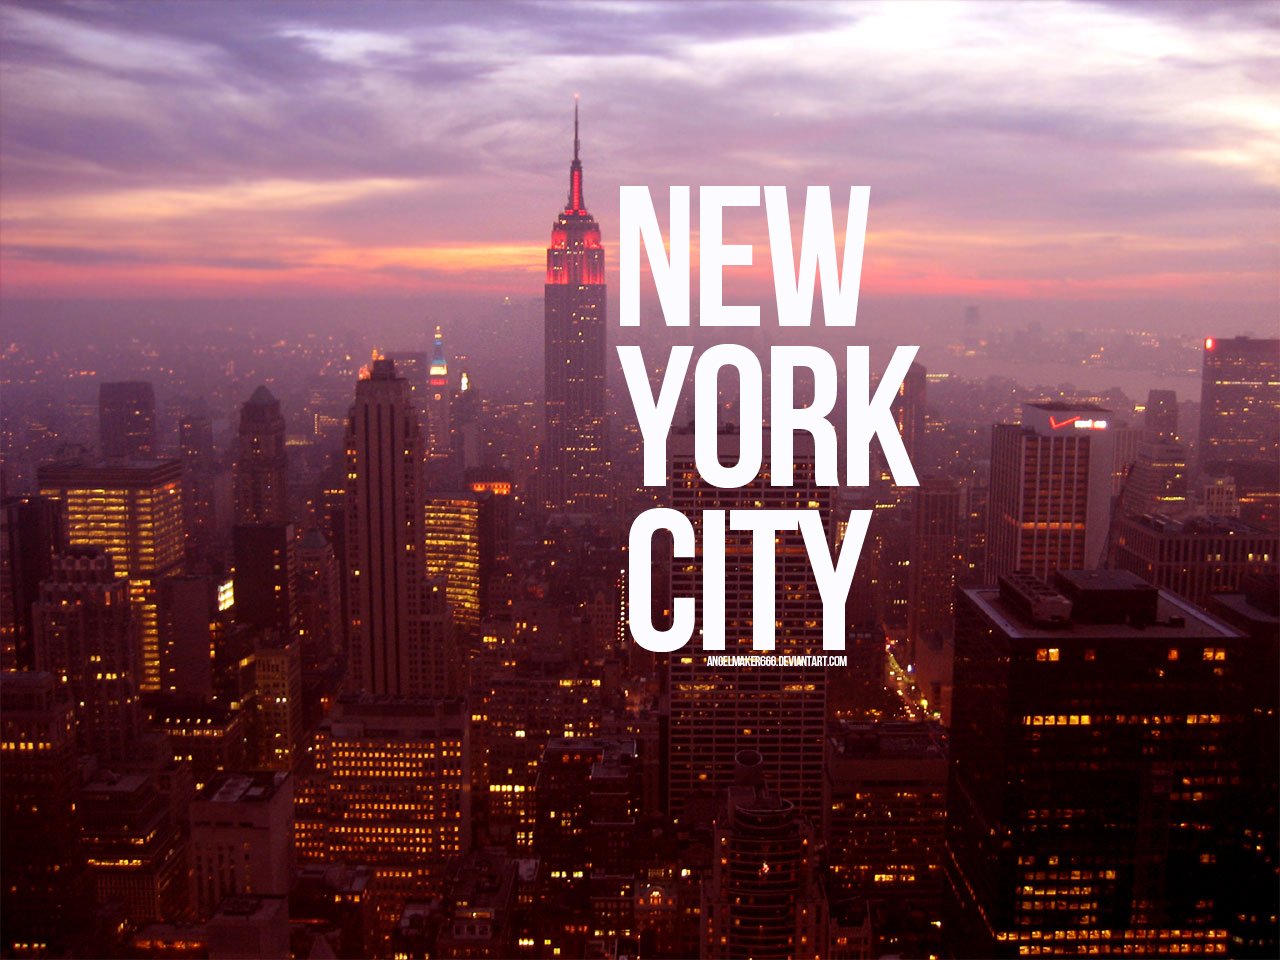 New York City Wallpaper by IshaanMishra on